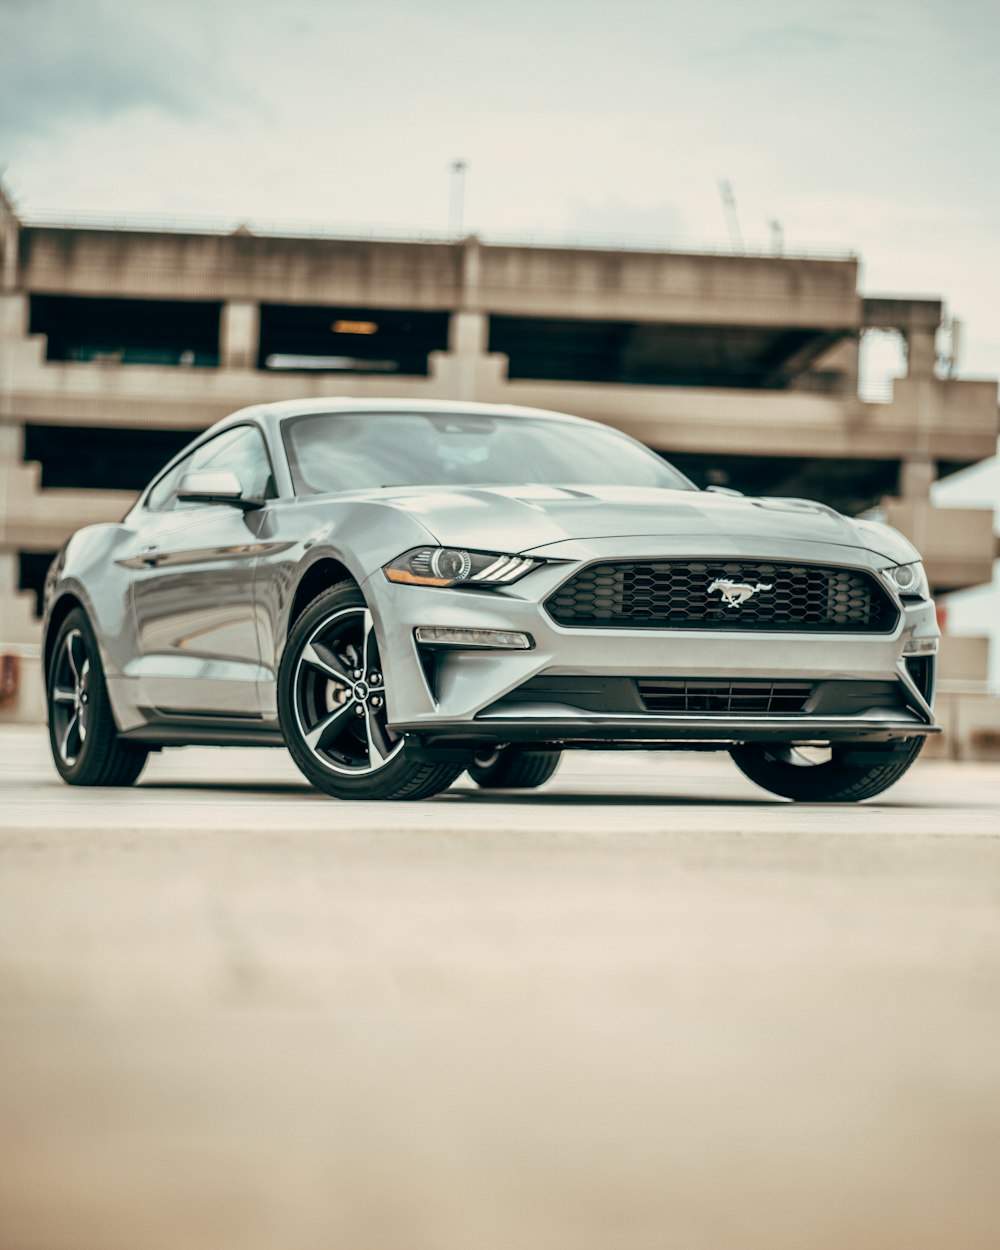 Mustang Car Pictures | Download Free Images on Unsplash